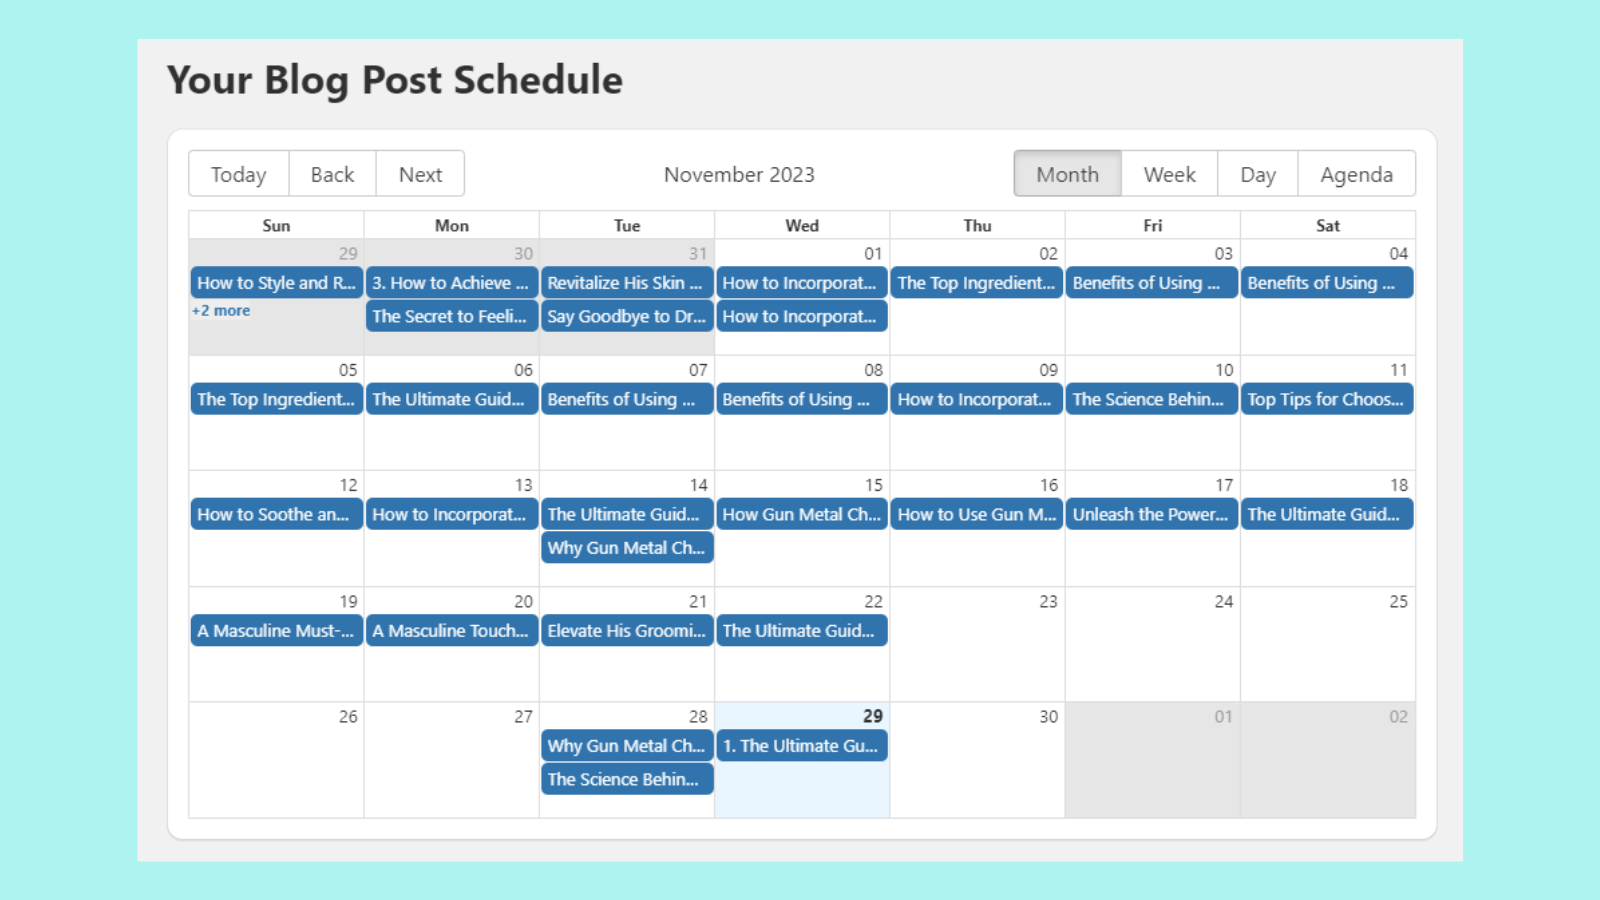 Calendar view shows you what you've written & what's coming up.